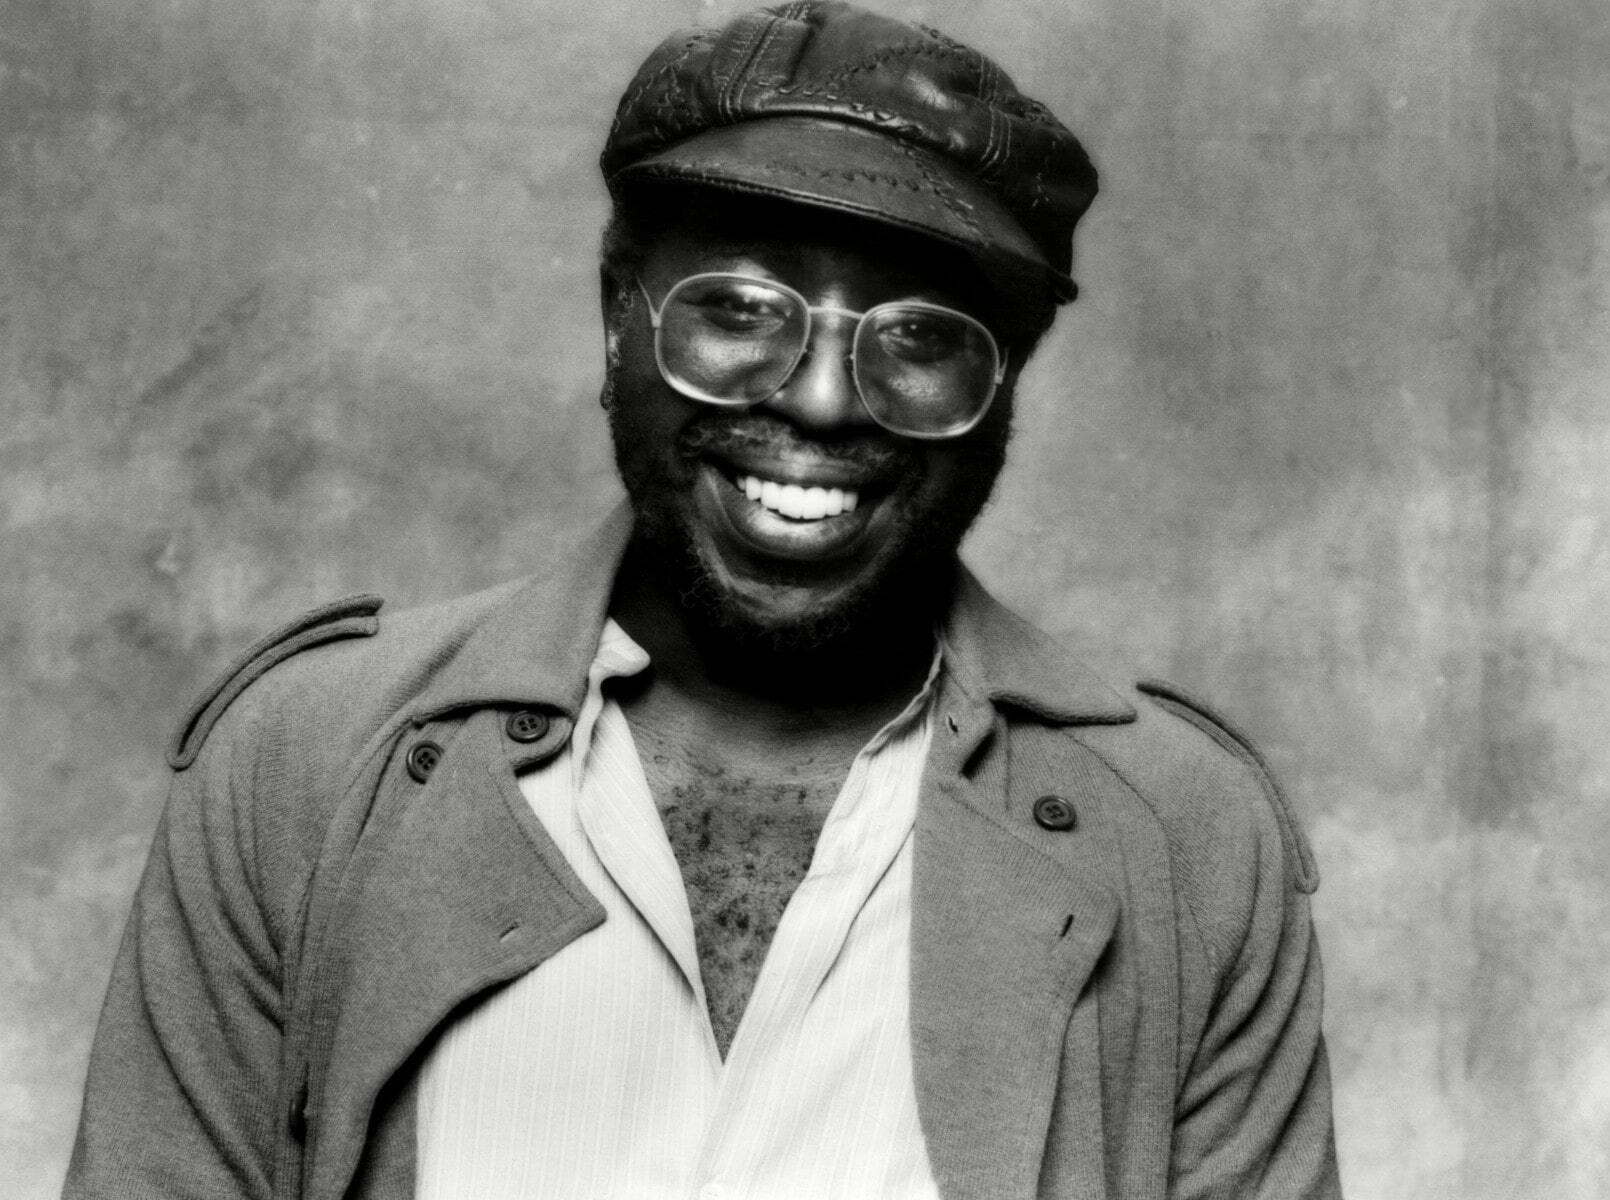 <p>The title of Curtis Mayfield’s 1970 song “We the People Who Are Darker Than Blue” is a nod to the first three words of the Constitution of the United States, “We the people.” Its lyrics are a call for solidarity among Black people, regardless of how light or dark their skin colour: “This ain’t no time for segregatin’ / I’m talking ’bout brown and yellow too / High yellow girl, can’t you tell / You’re just the surface of our dark deep well.” (Note: “<a href="https://www.merriam-webster.com/dictionary/high%20yellow">High yellow</a>” is an outdated term used to describe a light-skinned Black person.) </p><p><a href="https://www.youtube.com/watch?v=Tm8lcTTDp0o">Listen to the song here</a></p>